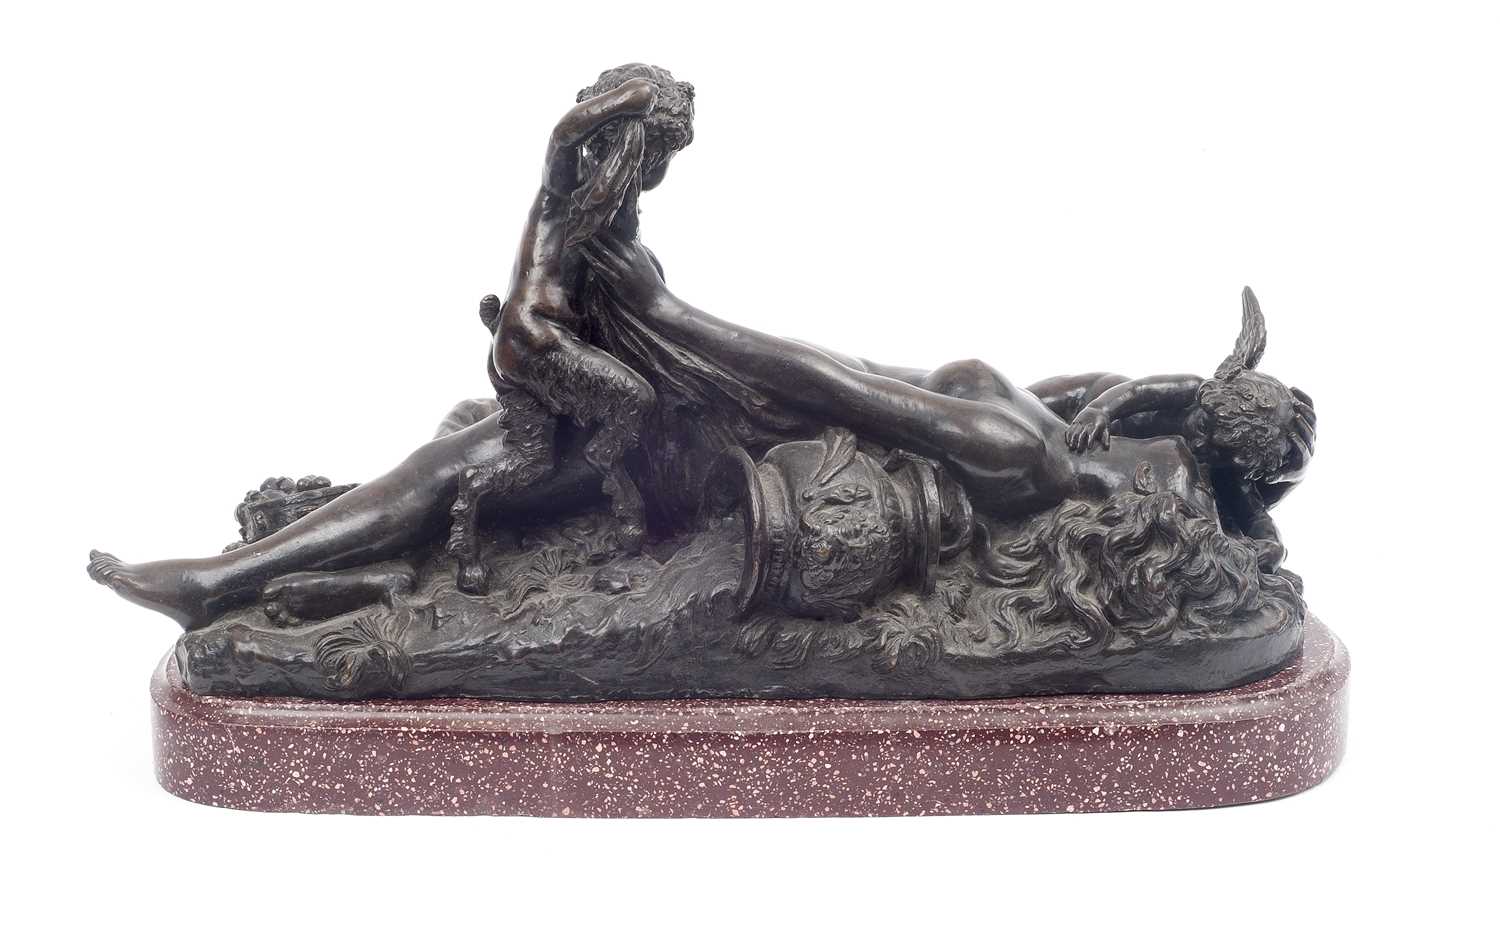 A LARGE 17TH CENTURY STYLE BRONZE EROTIC GROUP, PROBABLY 19TH CENTURY - Image 2 of 6